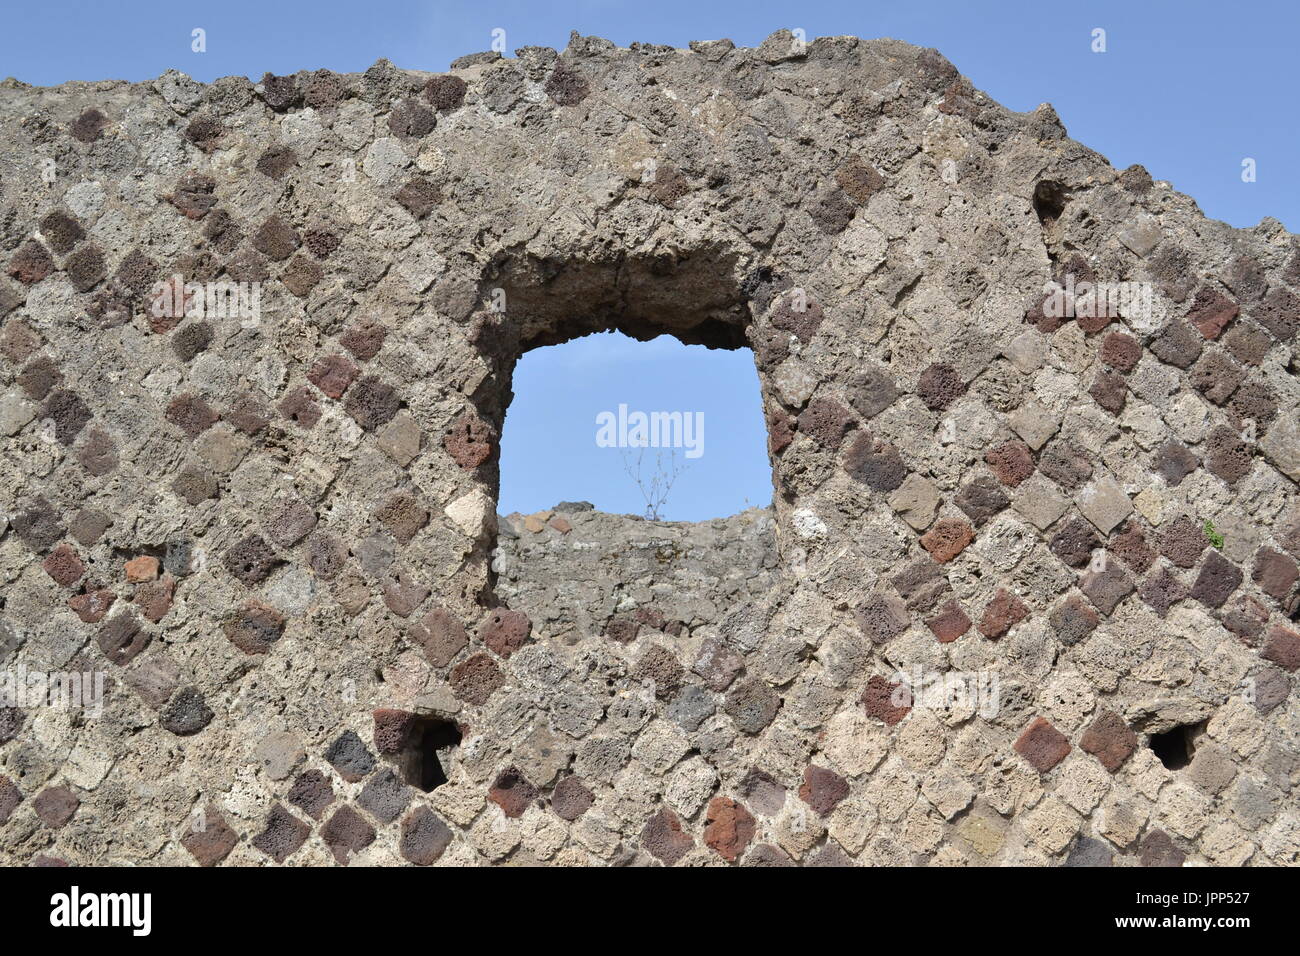 Different view of Pompeii, Italy - Life between the rocks Stock Photo